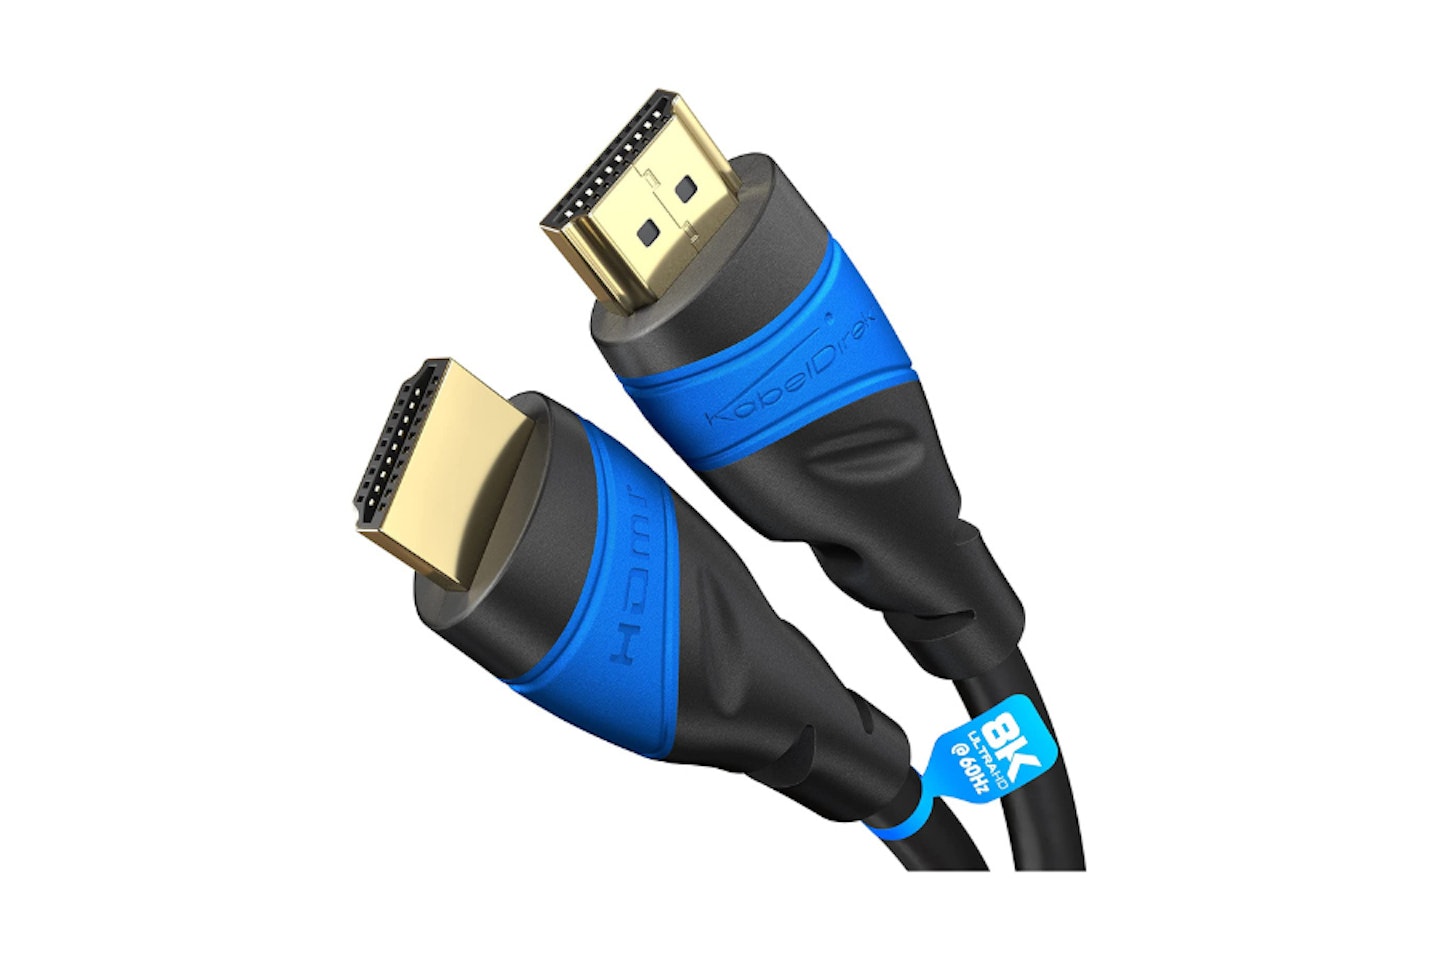 2M HDMI 2.1 Cable 8K 48Gbps by True HQ™